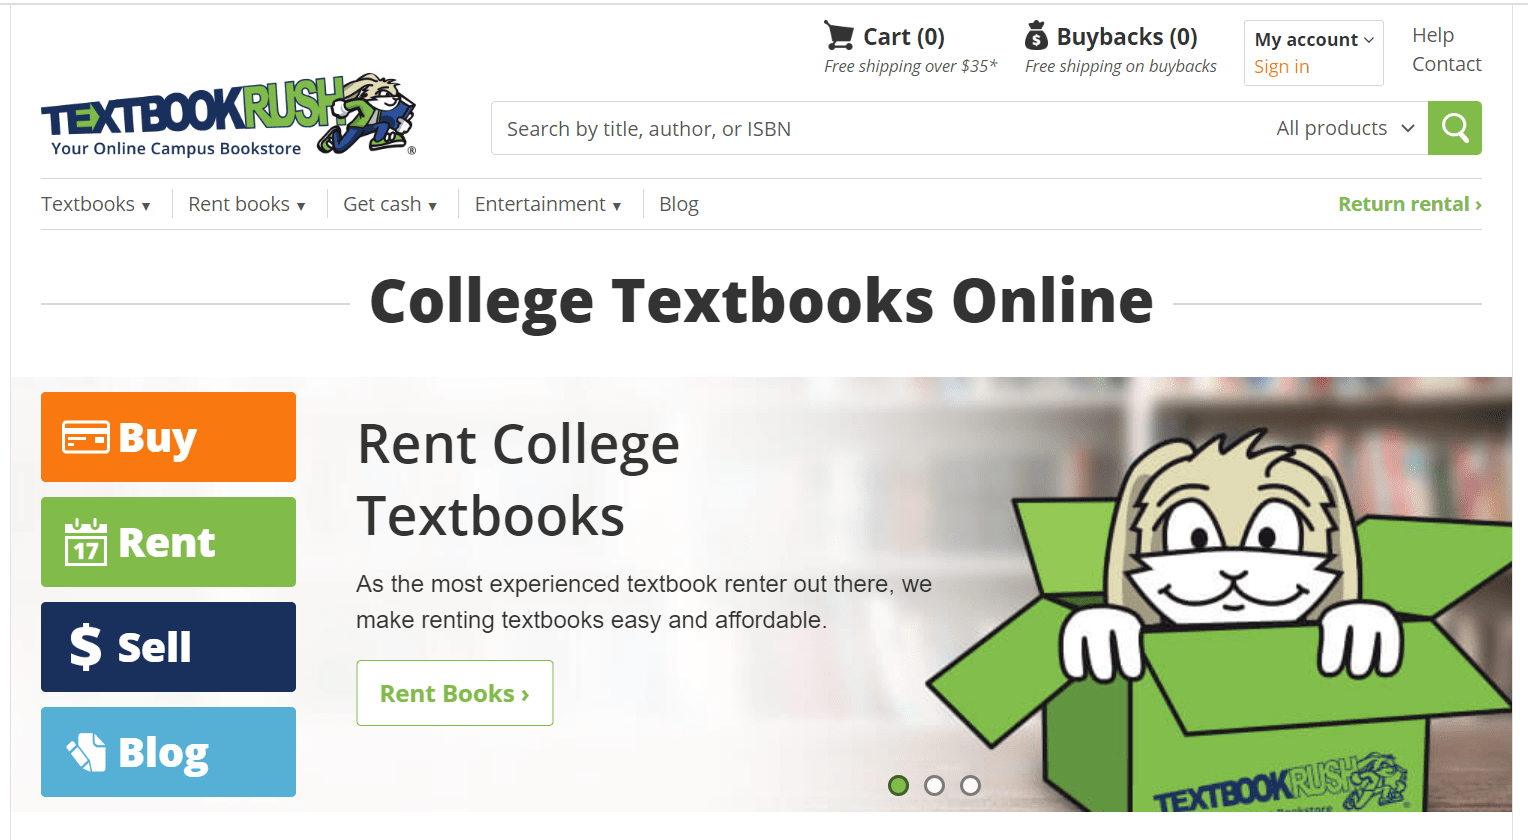 How to make $50 fast daily selling used textbooks